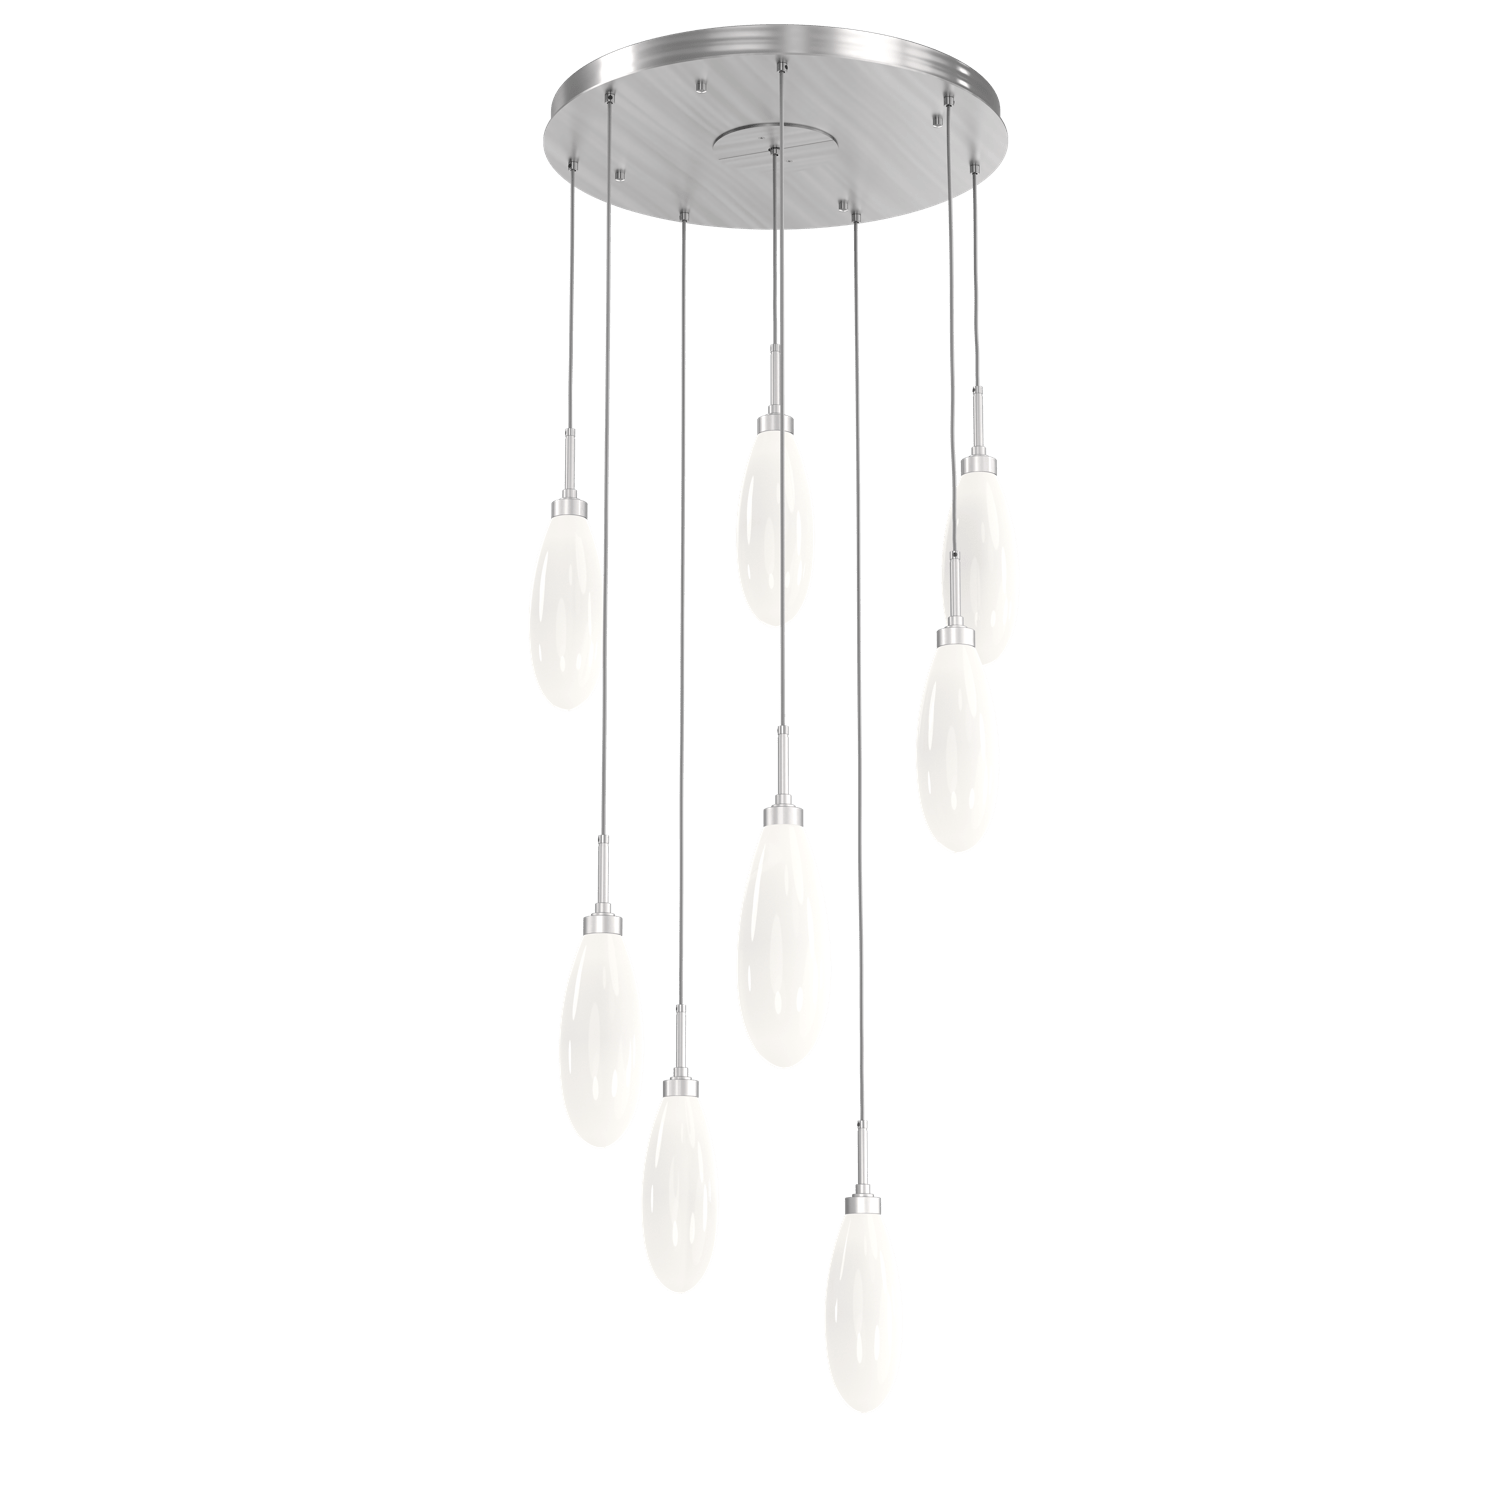 CHB0071-08-SN-WL-LL-Hammerton-Studio-Fiori-8-light-round-pendant-chandelier-with-satin-nickel-finish-and-opal-white-glass-shades-and-LED-lamping